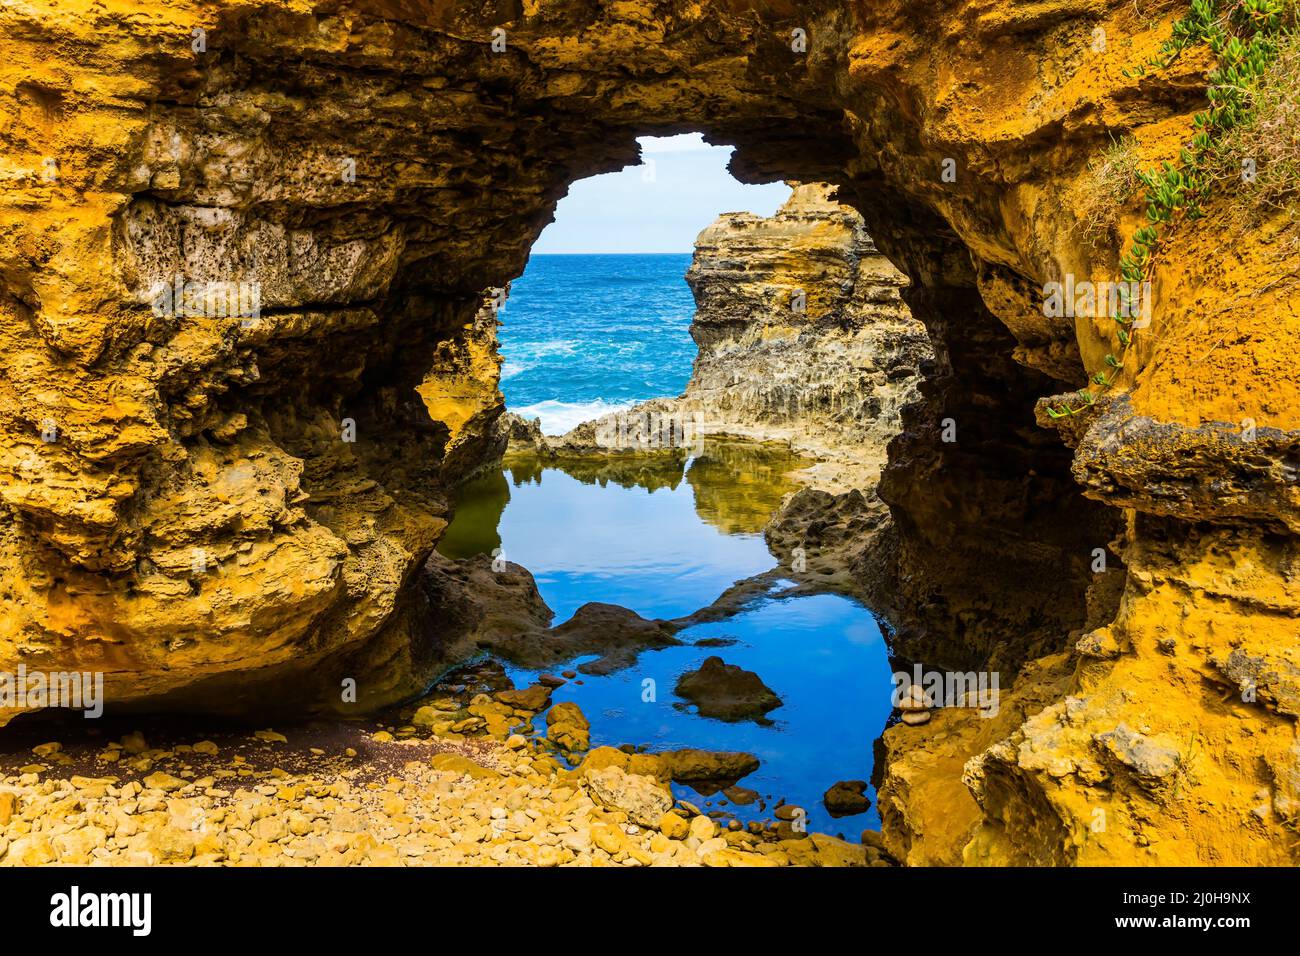 The bays, rocks and arches Stock Photo